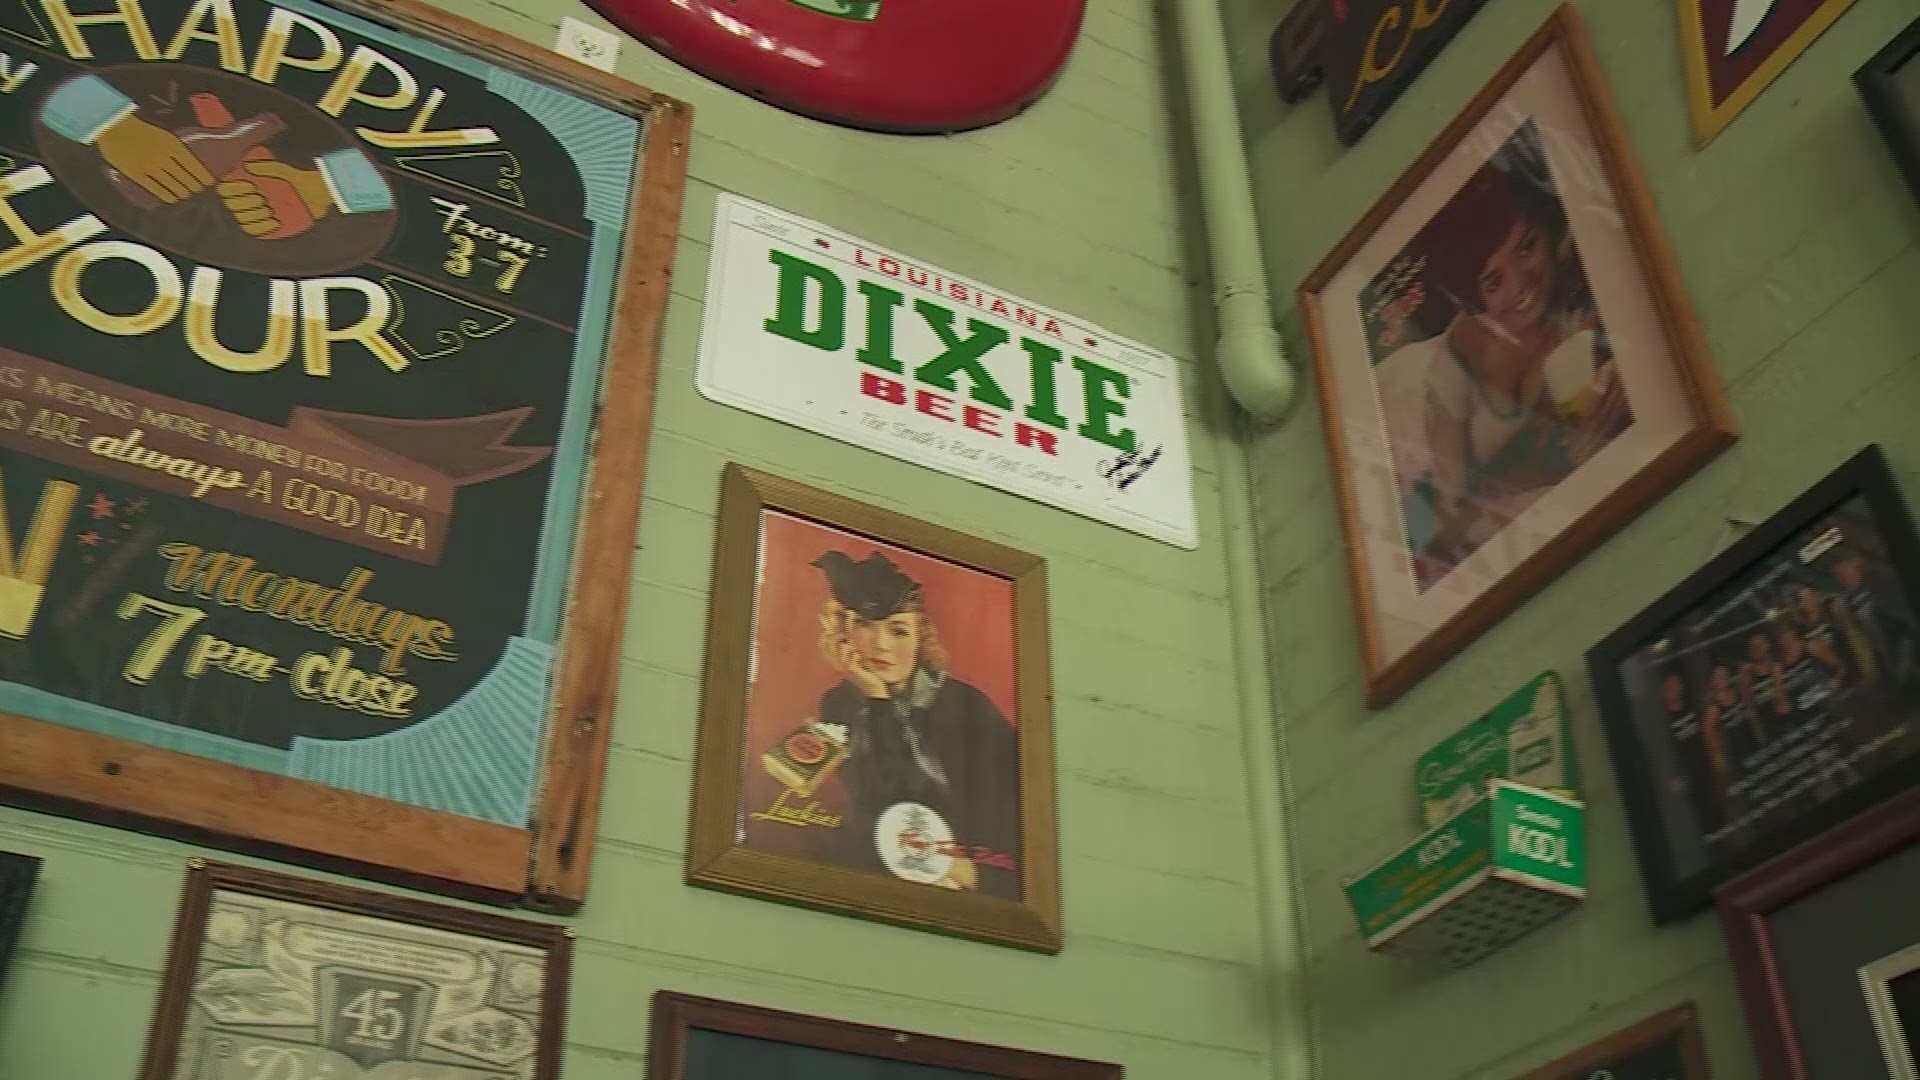 Dixie Beer was originally established in 1907 as a craft brand, but had been brewed out of state since Hurricane Katrina.